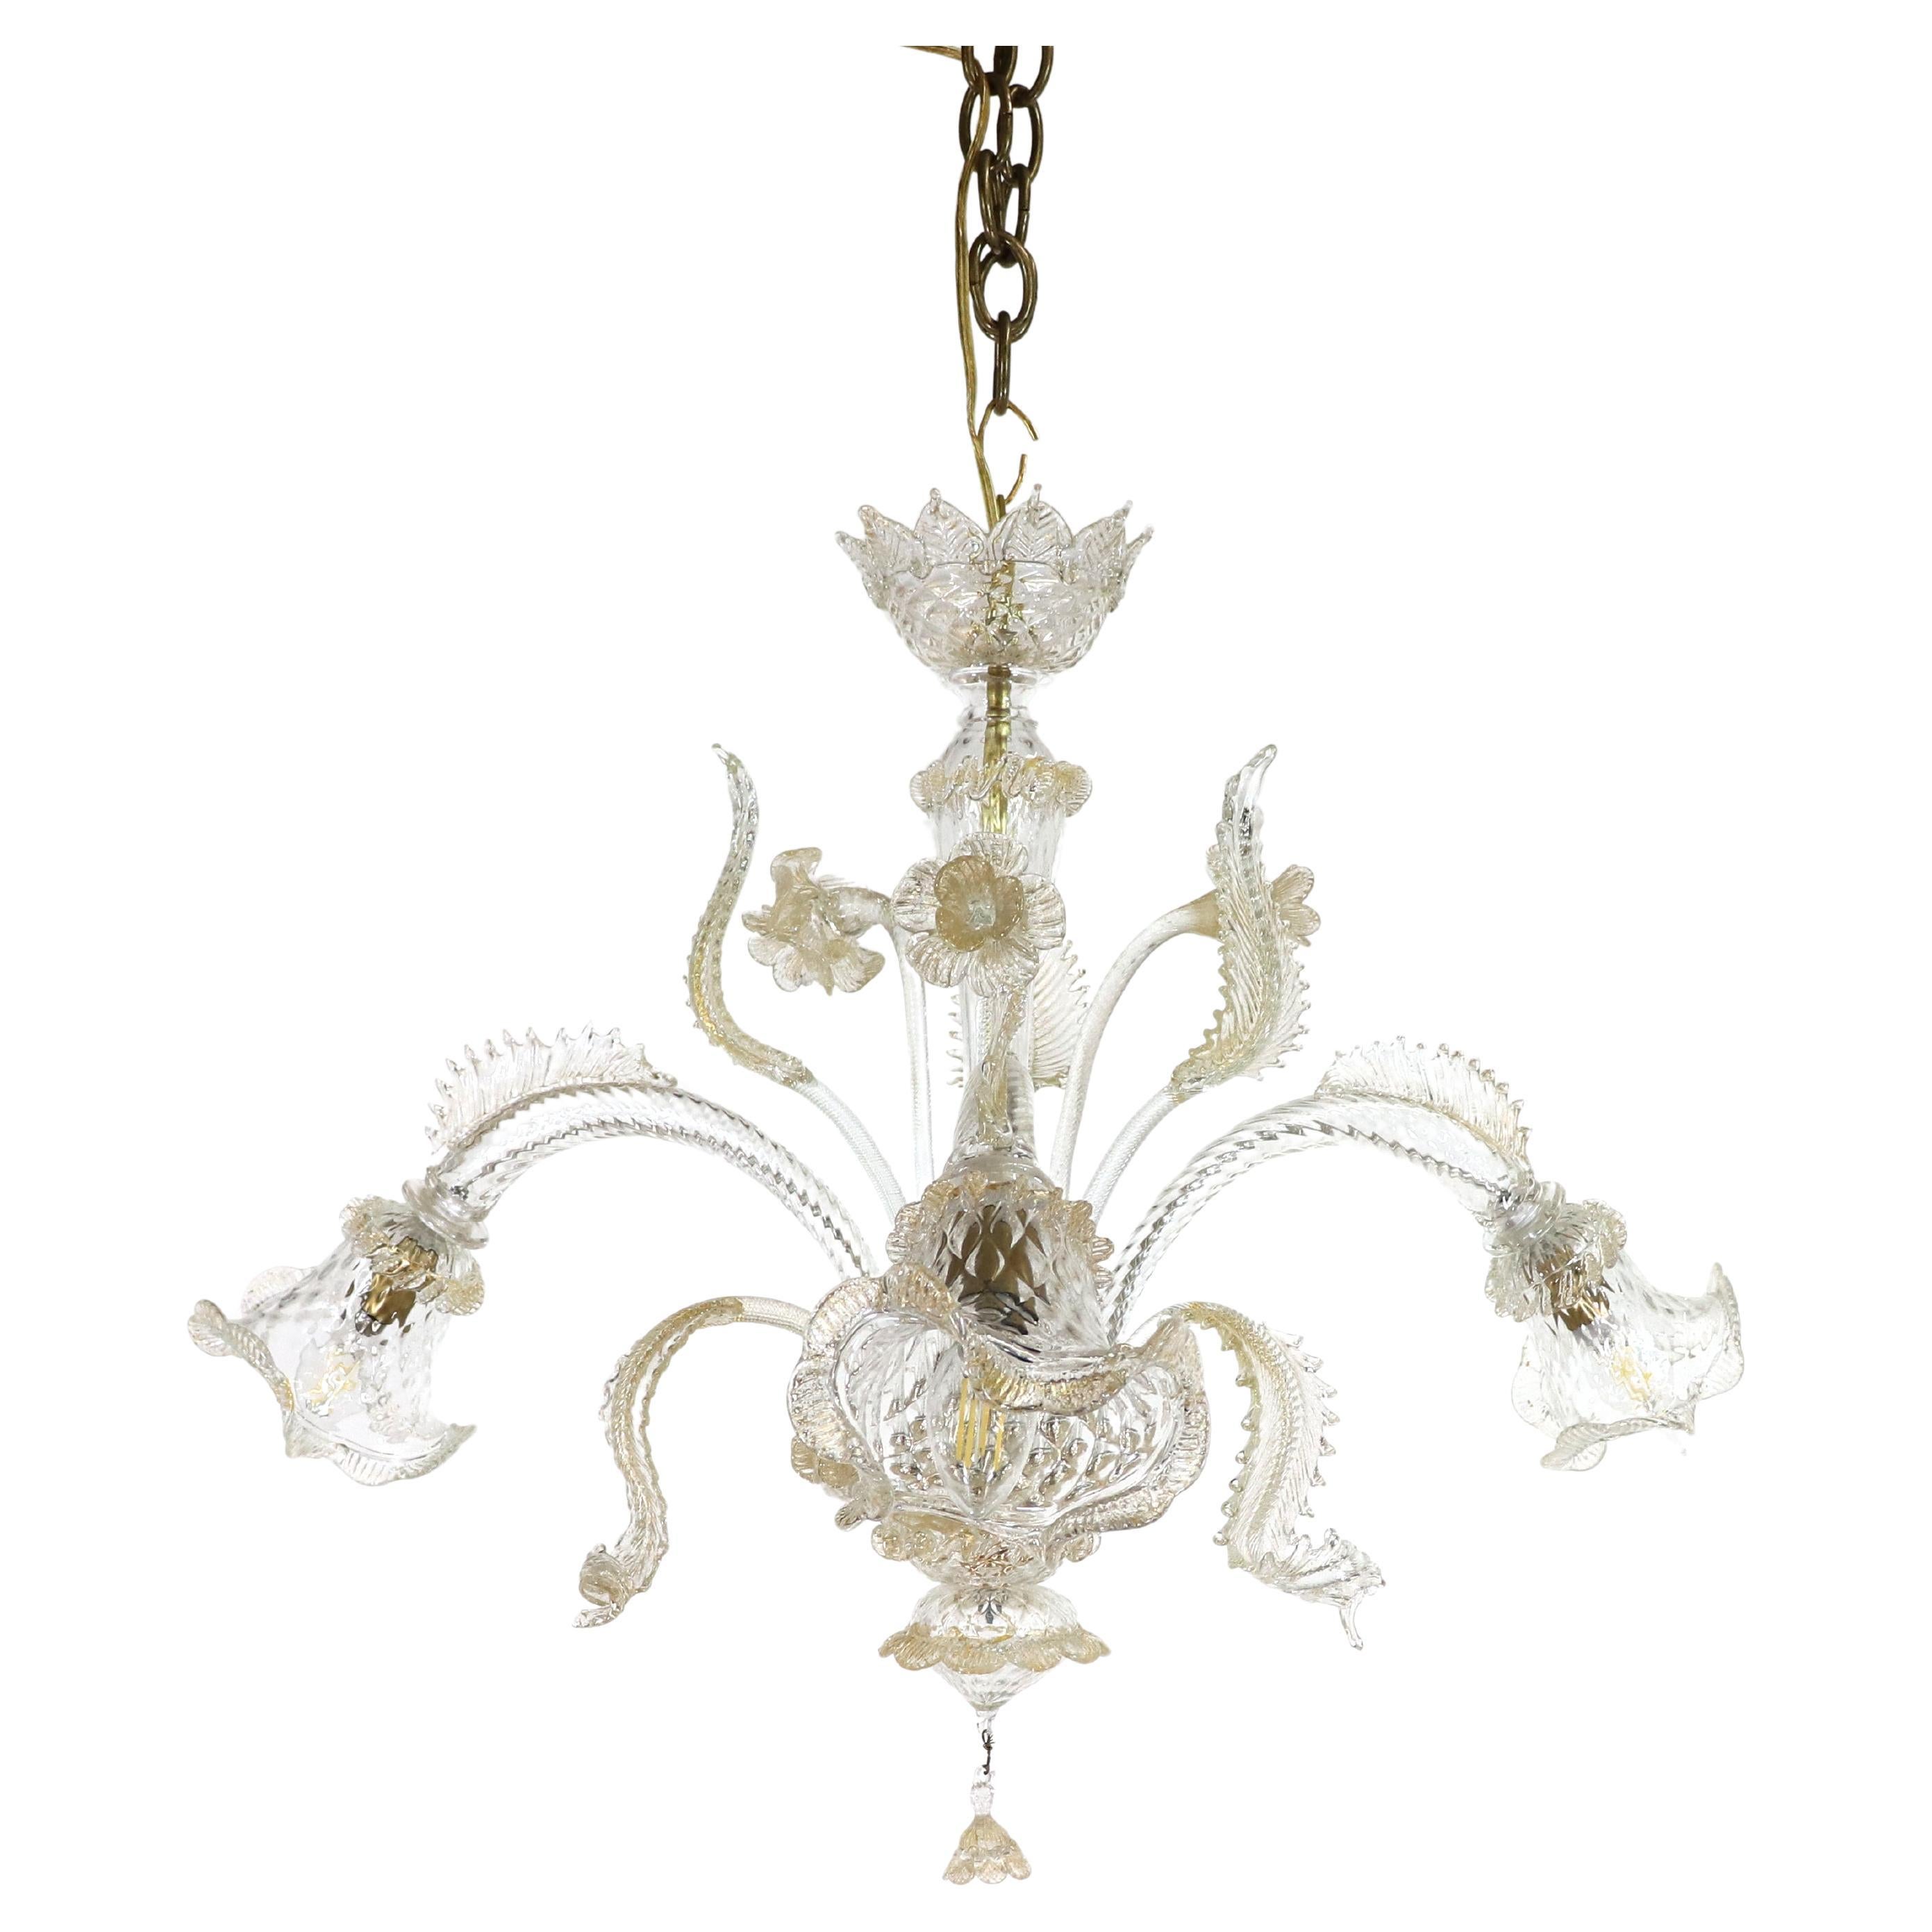 Vintage Baroque Style Floral Gold Inflused Three Arm Cristallo Murano Chandelier For Sale